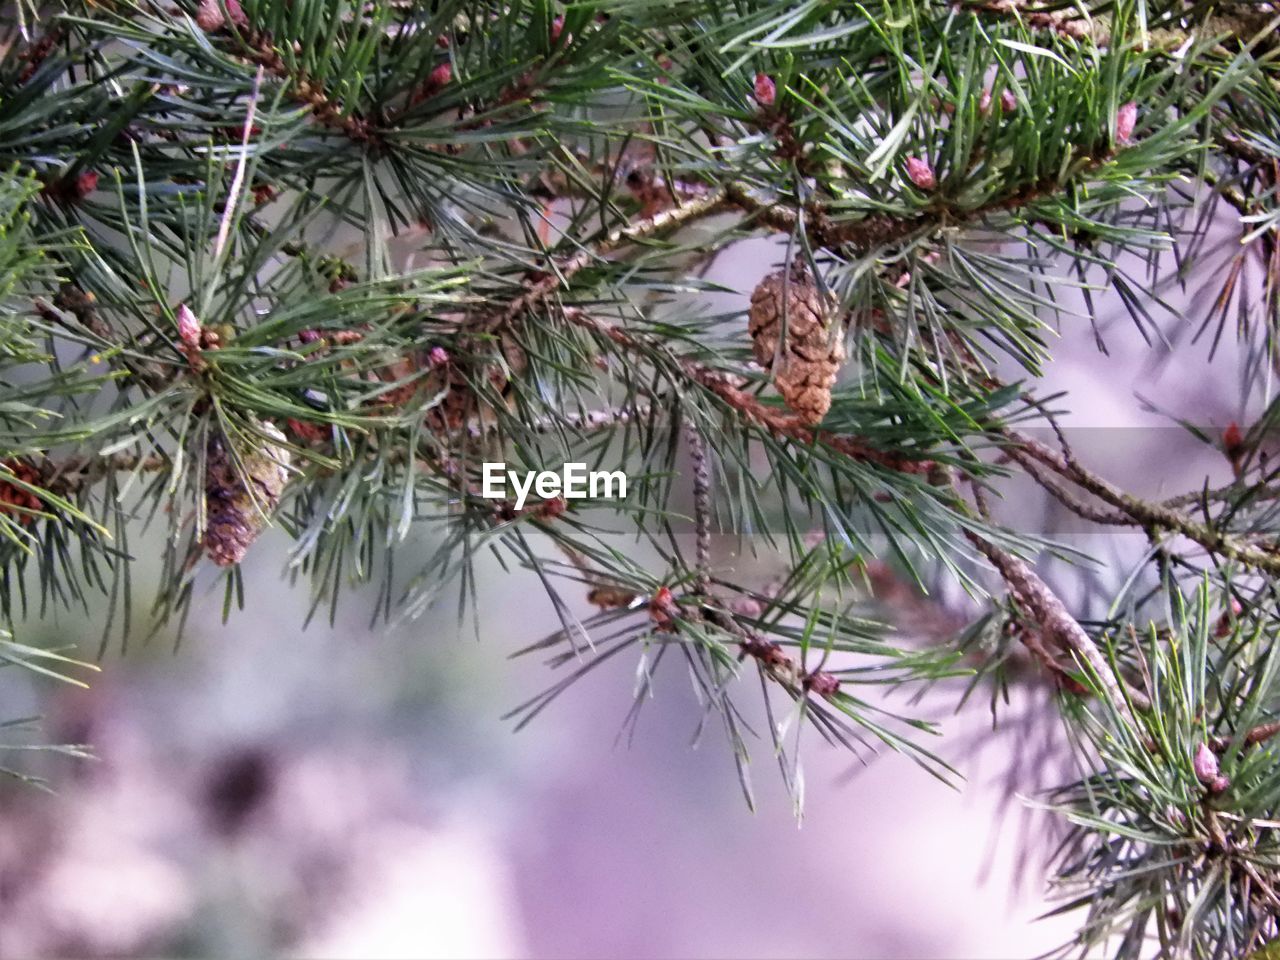 CLOSE-UP OF PINE TREE IN WINTER